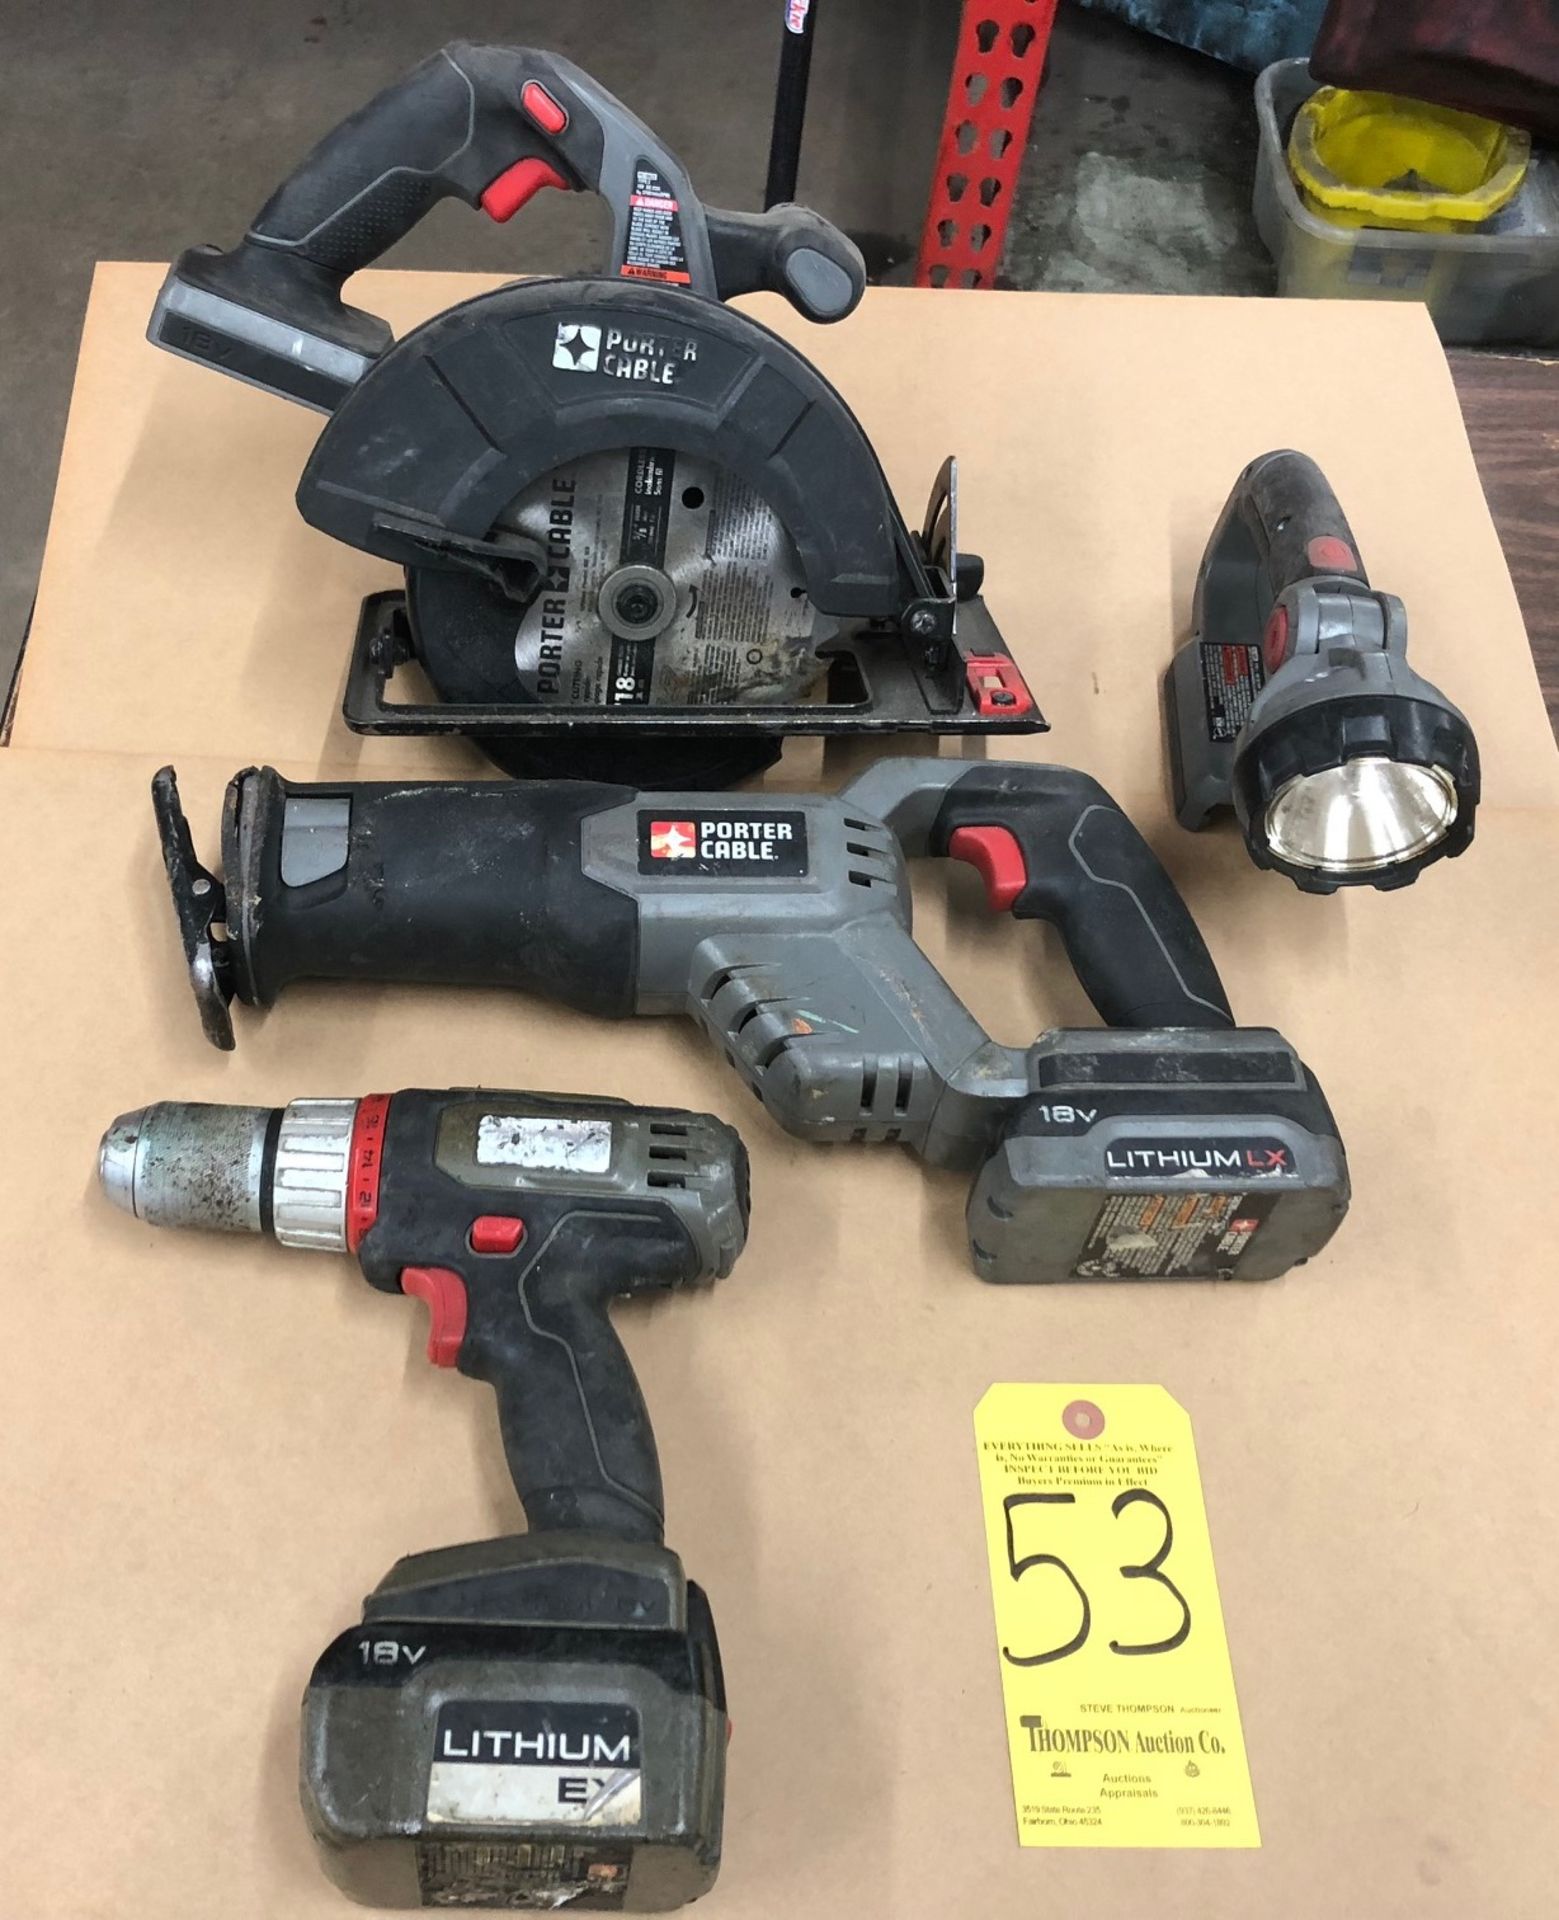 Lot, Porter Cable 1/2 In. Electric Drill, Trouble Light, Sawzall, and 6 1/2 In. Circular Saw, 18 V